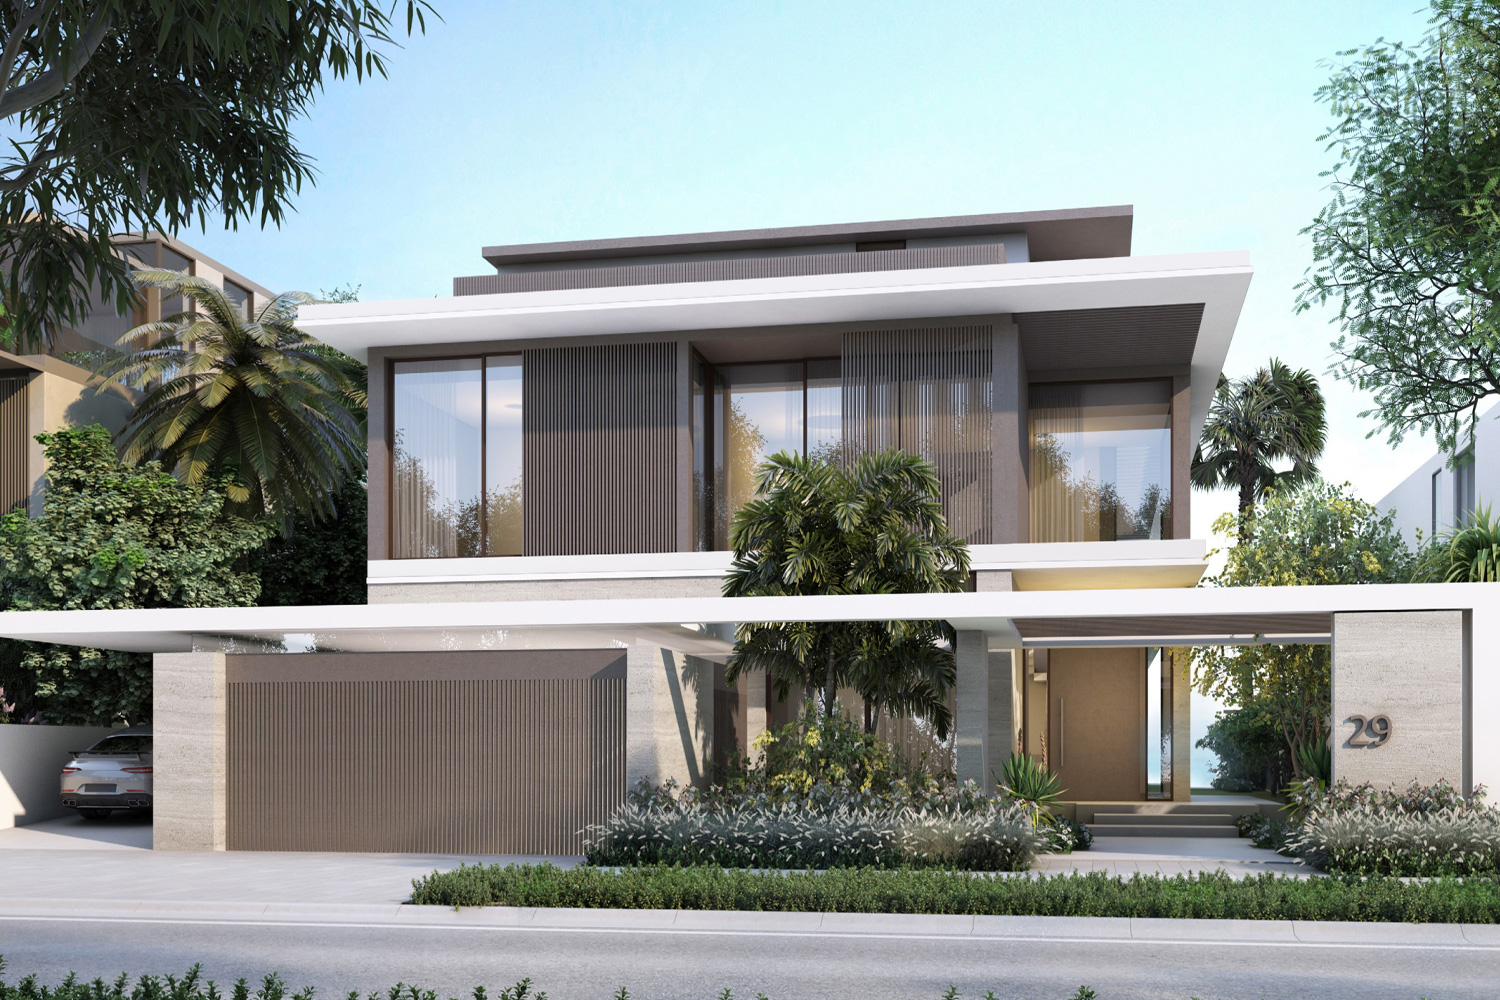 latest-project-in-dubai-the-beach-collection-for-sale-in-palm-jebel-ali